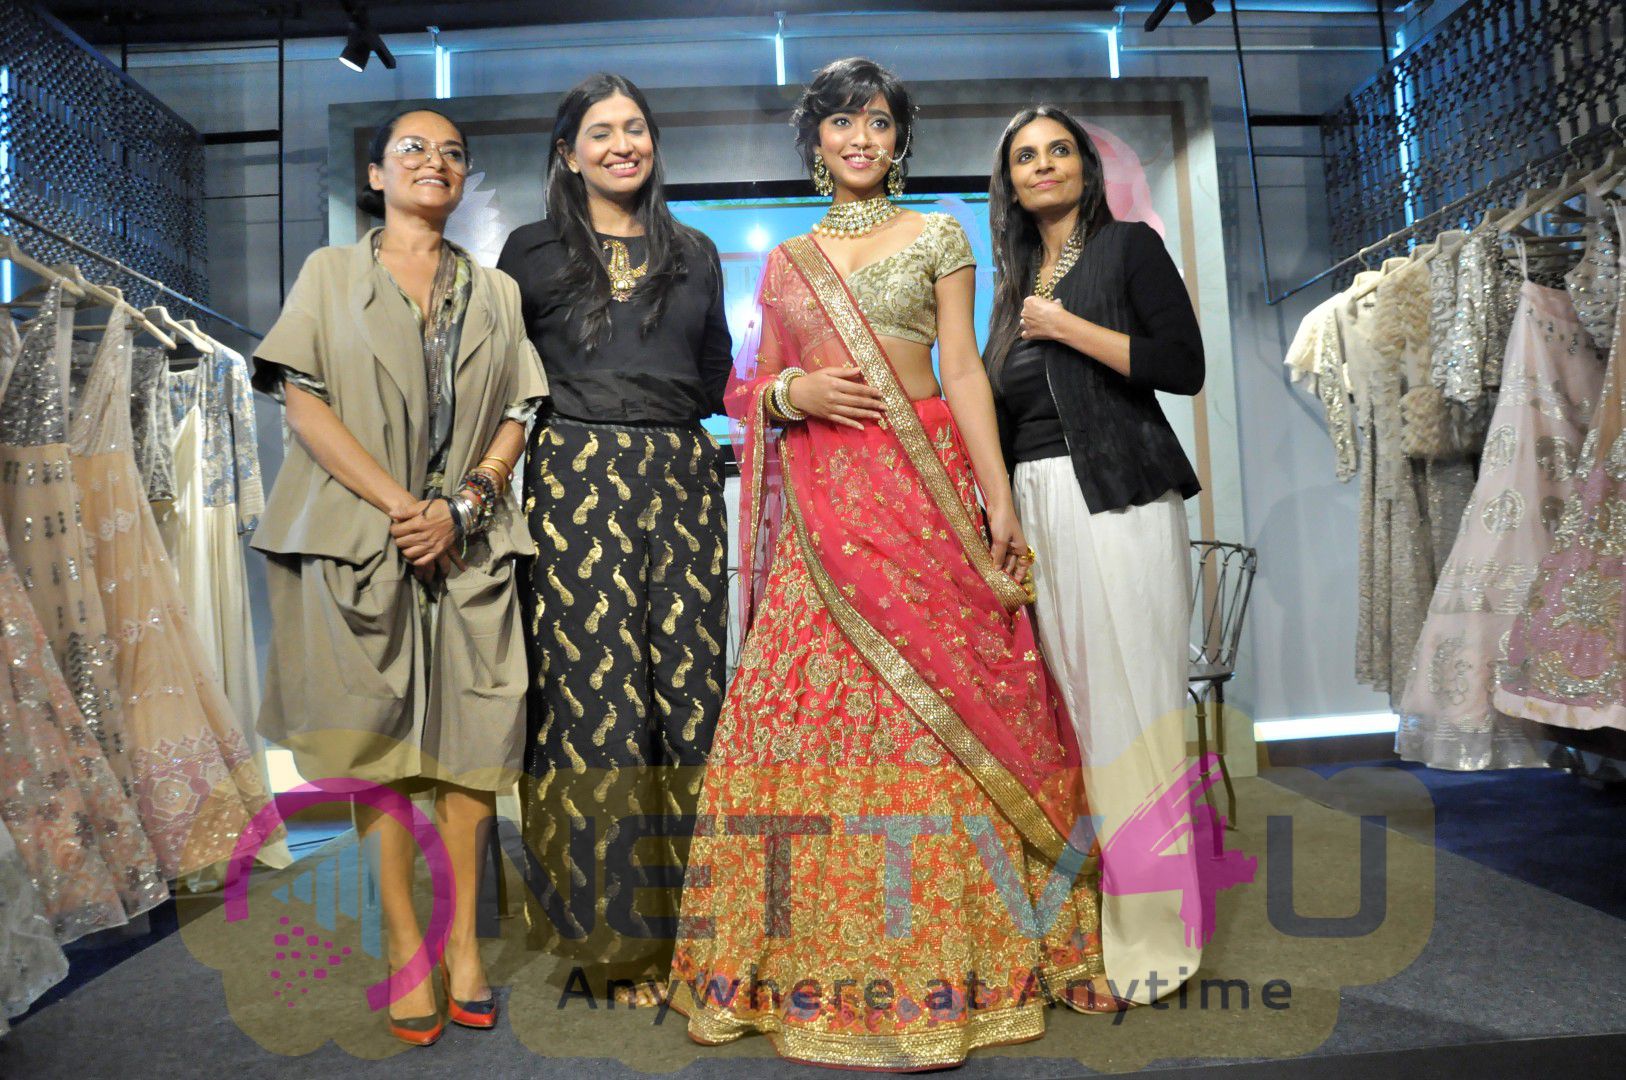 A Prelude To The Vogue Wedding Show 2016 With Actress Sayani Gupta Lovely Stills Hindi Gallery